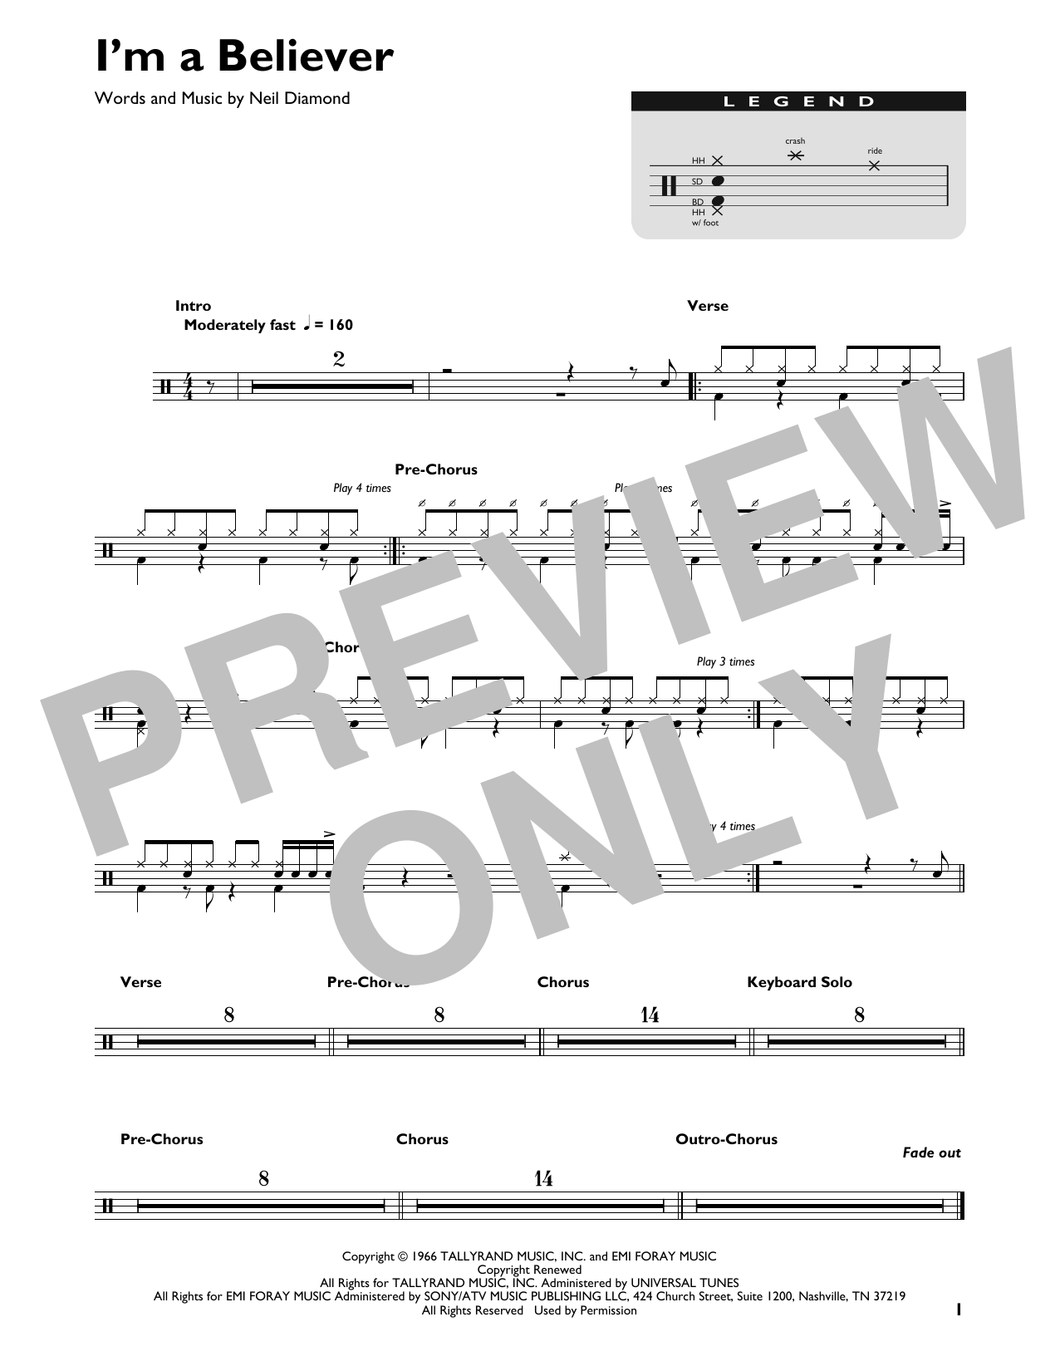 I'm a Believer - The Monkees - Full Drum Transcription / Drum Sheet Music - SheetMusicDirect DT427064